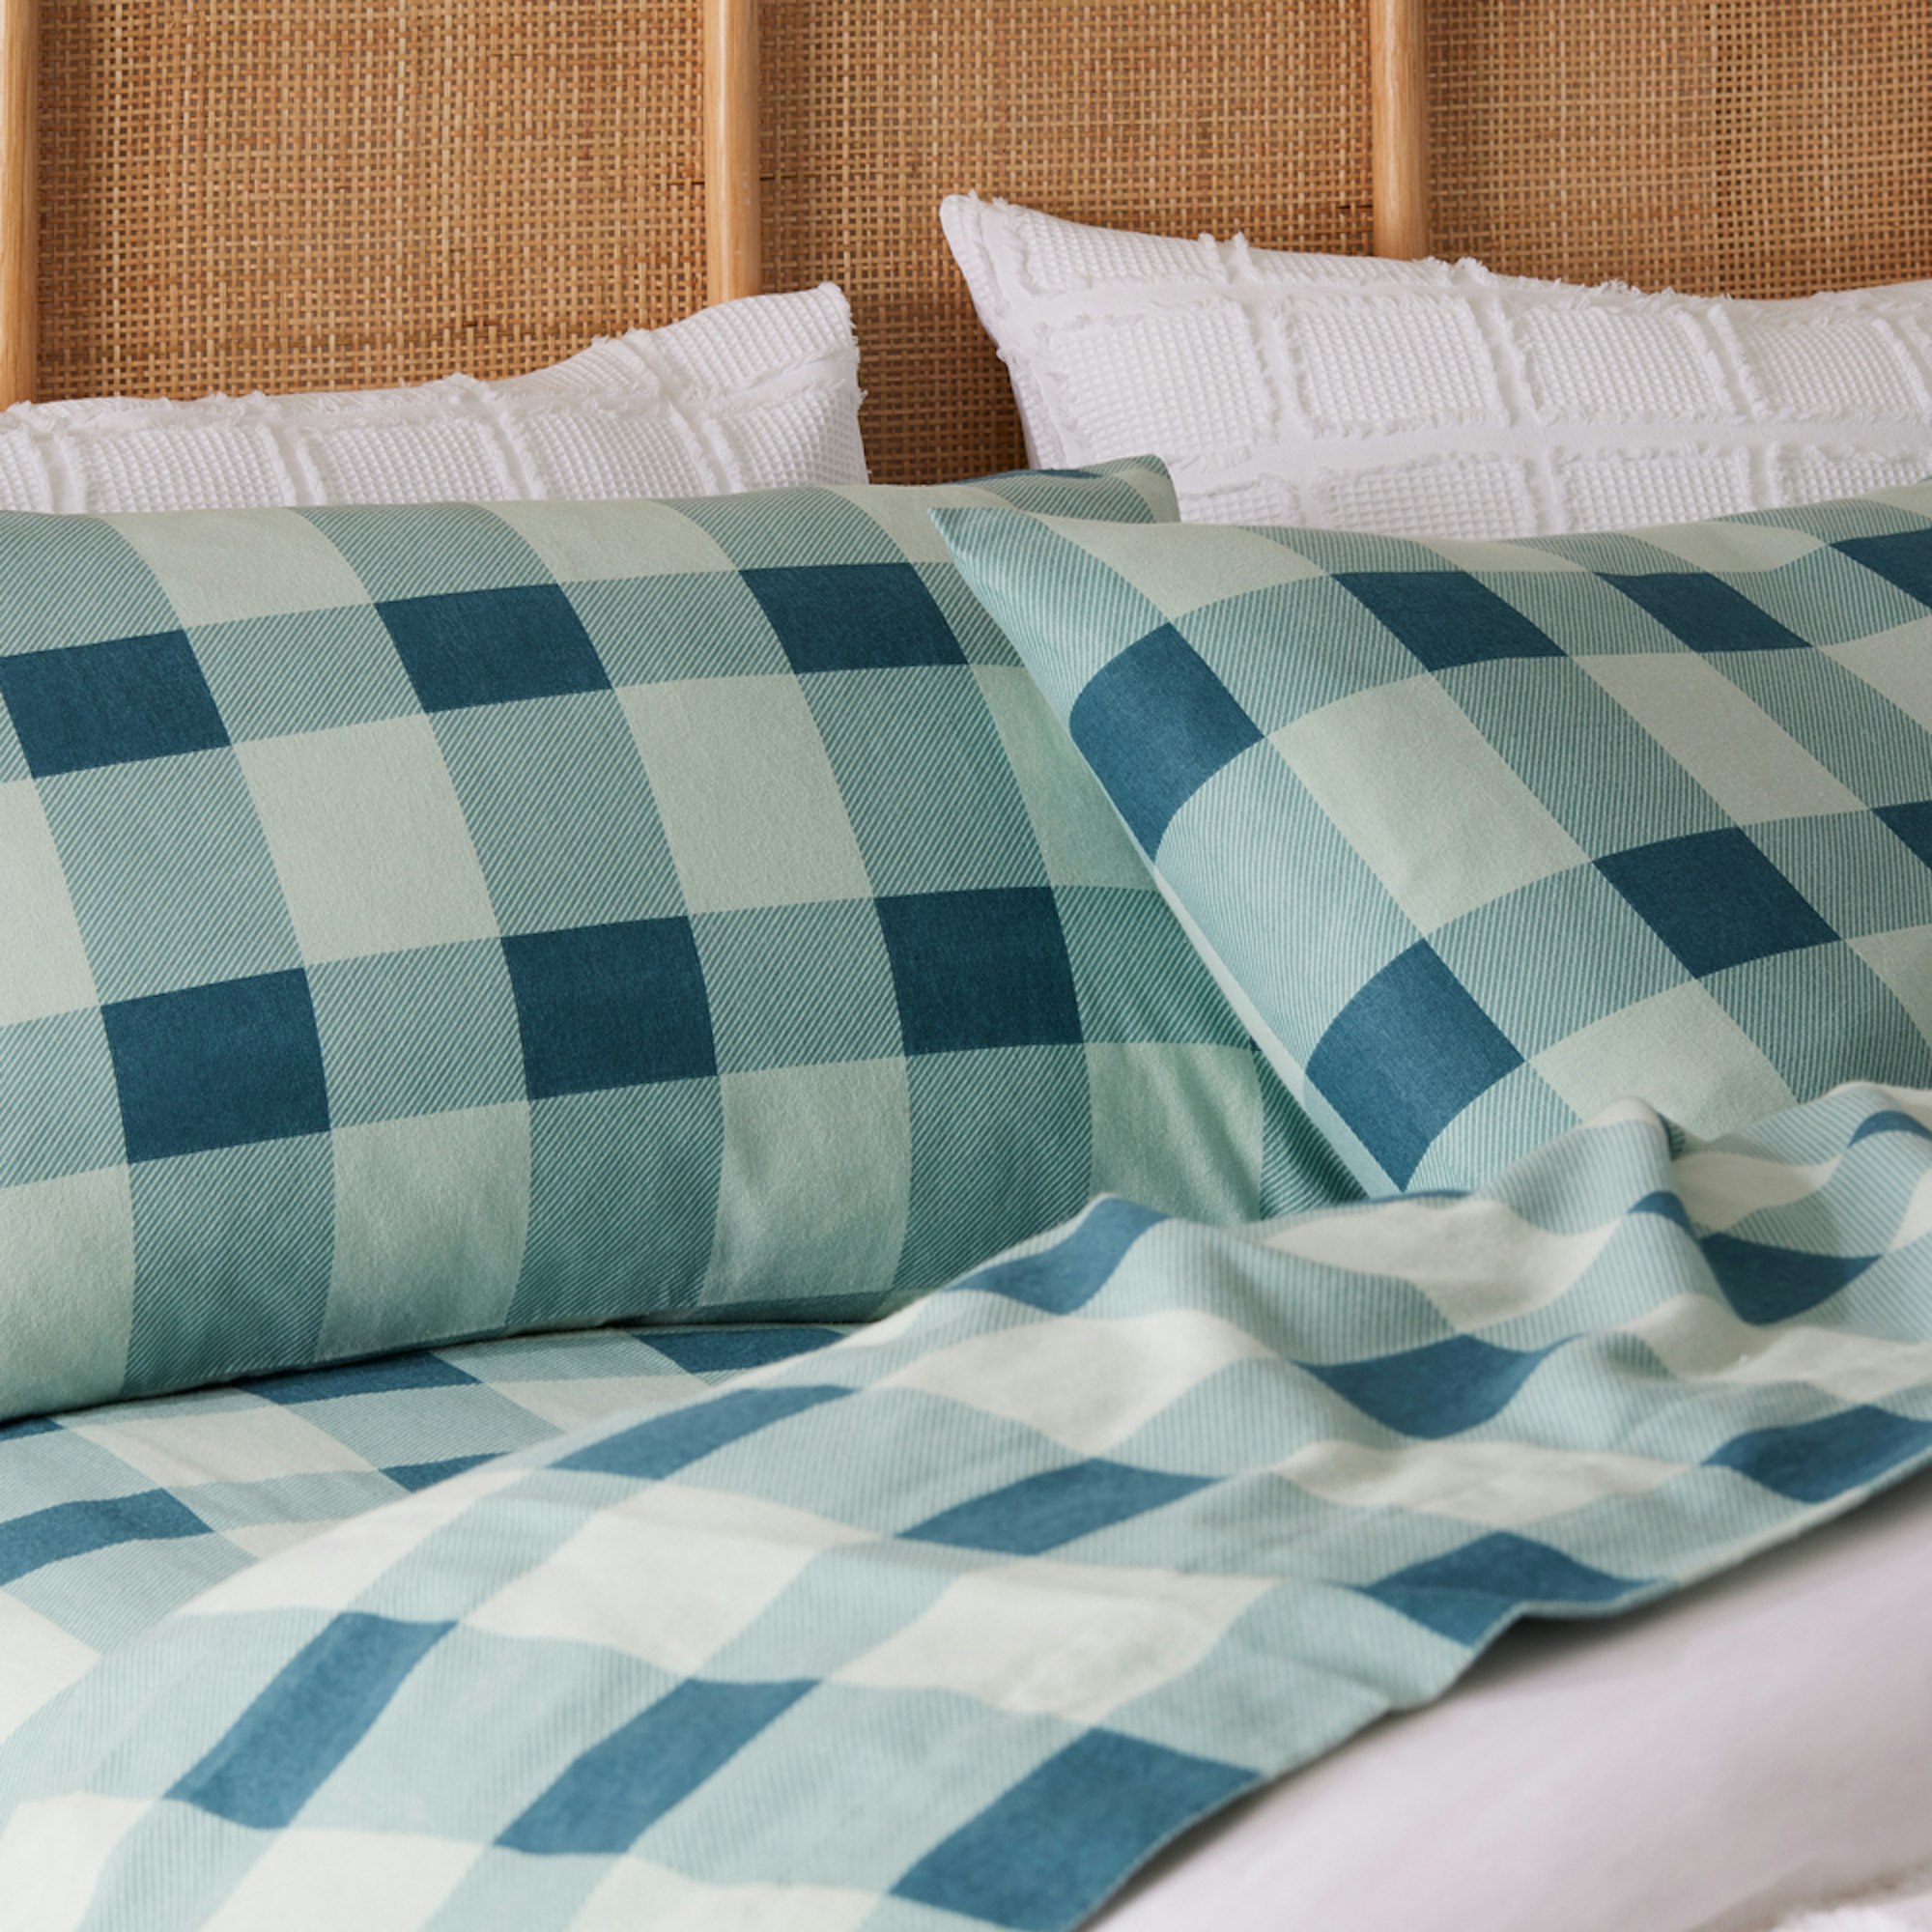 MyHouse Flannel Gingham sheet set flannelette blue and green gingham bed setting